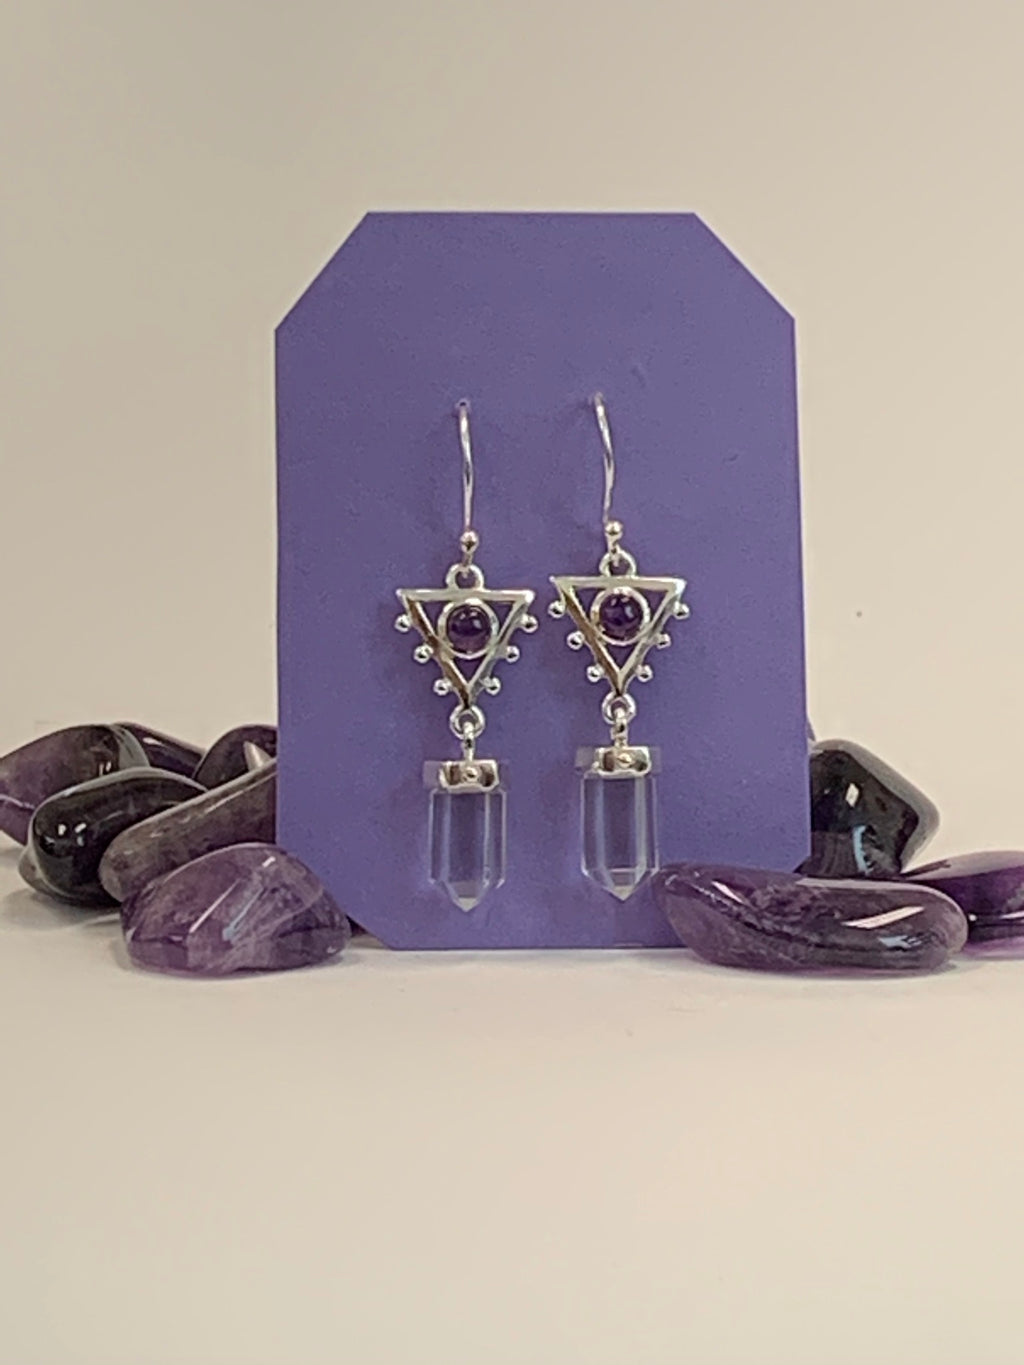 Small, round amethyst gemstones (cabs, not faceted) sit within a sterling silver upside-down triangle with tiny balls of silver lining two sides of the triangle. Clear quartz crystal points dangle below the triangle. These beautiful earrings have wires, not posts and are approximately 1½" long.